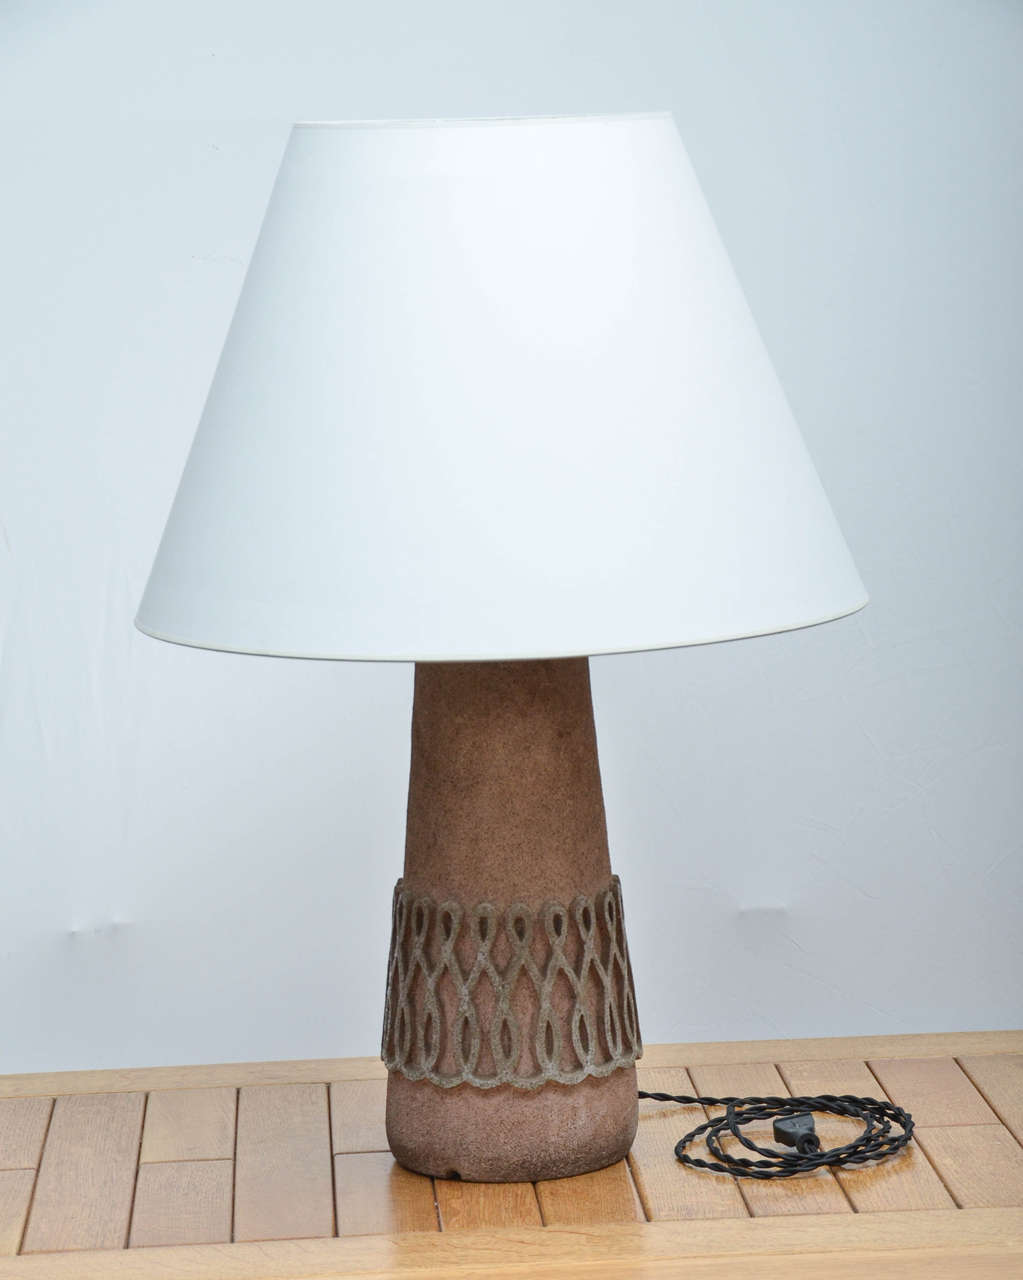 Stone Table Lamp, with natural tan/beige body and intricate design painted in a soft grey color. Base is heavy. Newly rewired with black twisted silk cord, bronze fittings. Shade is not included.